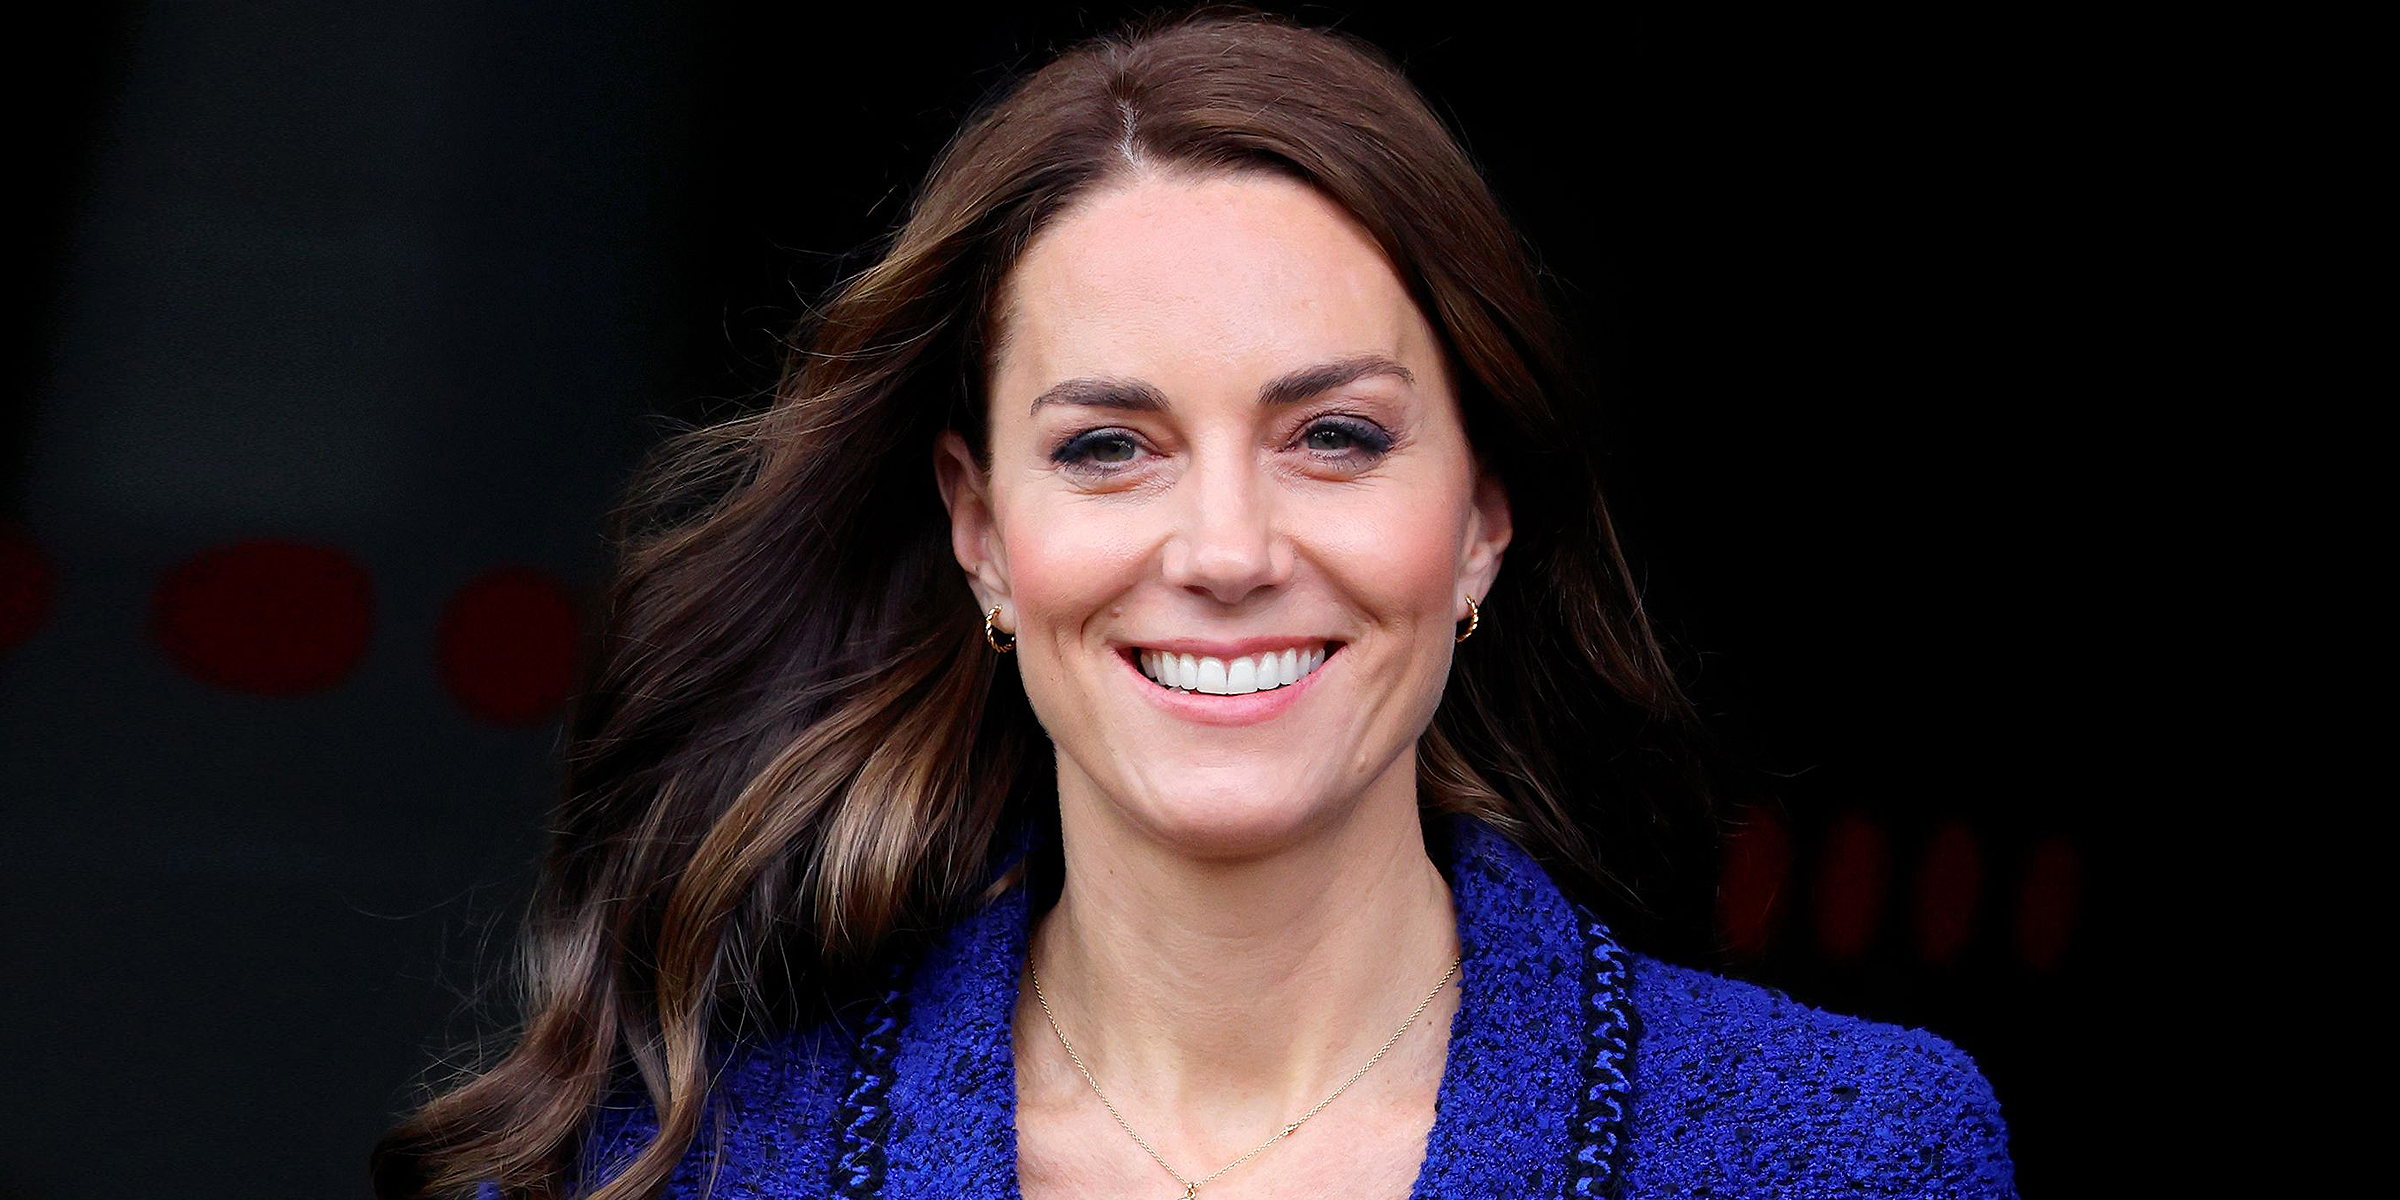 The Princess of Wales, Princess Catherine | Source: Getty Images